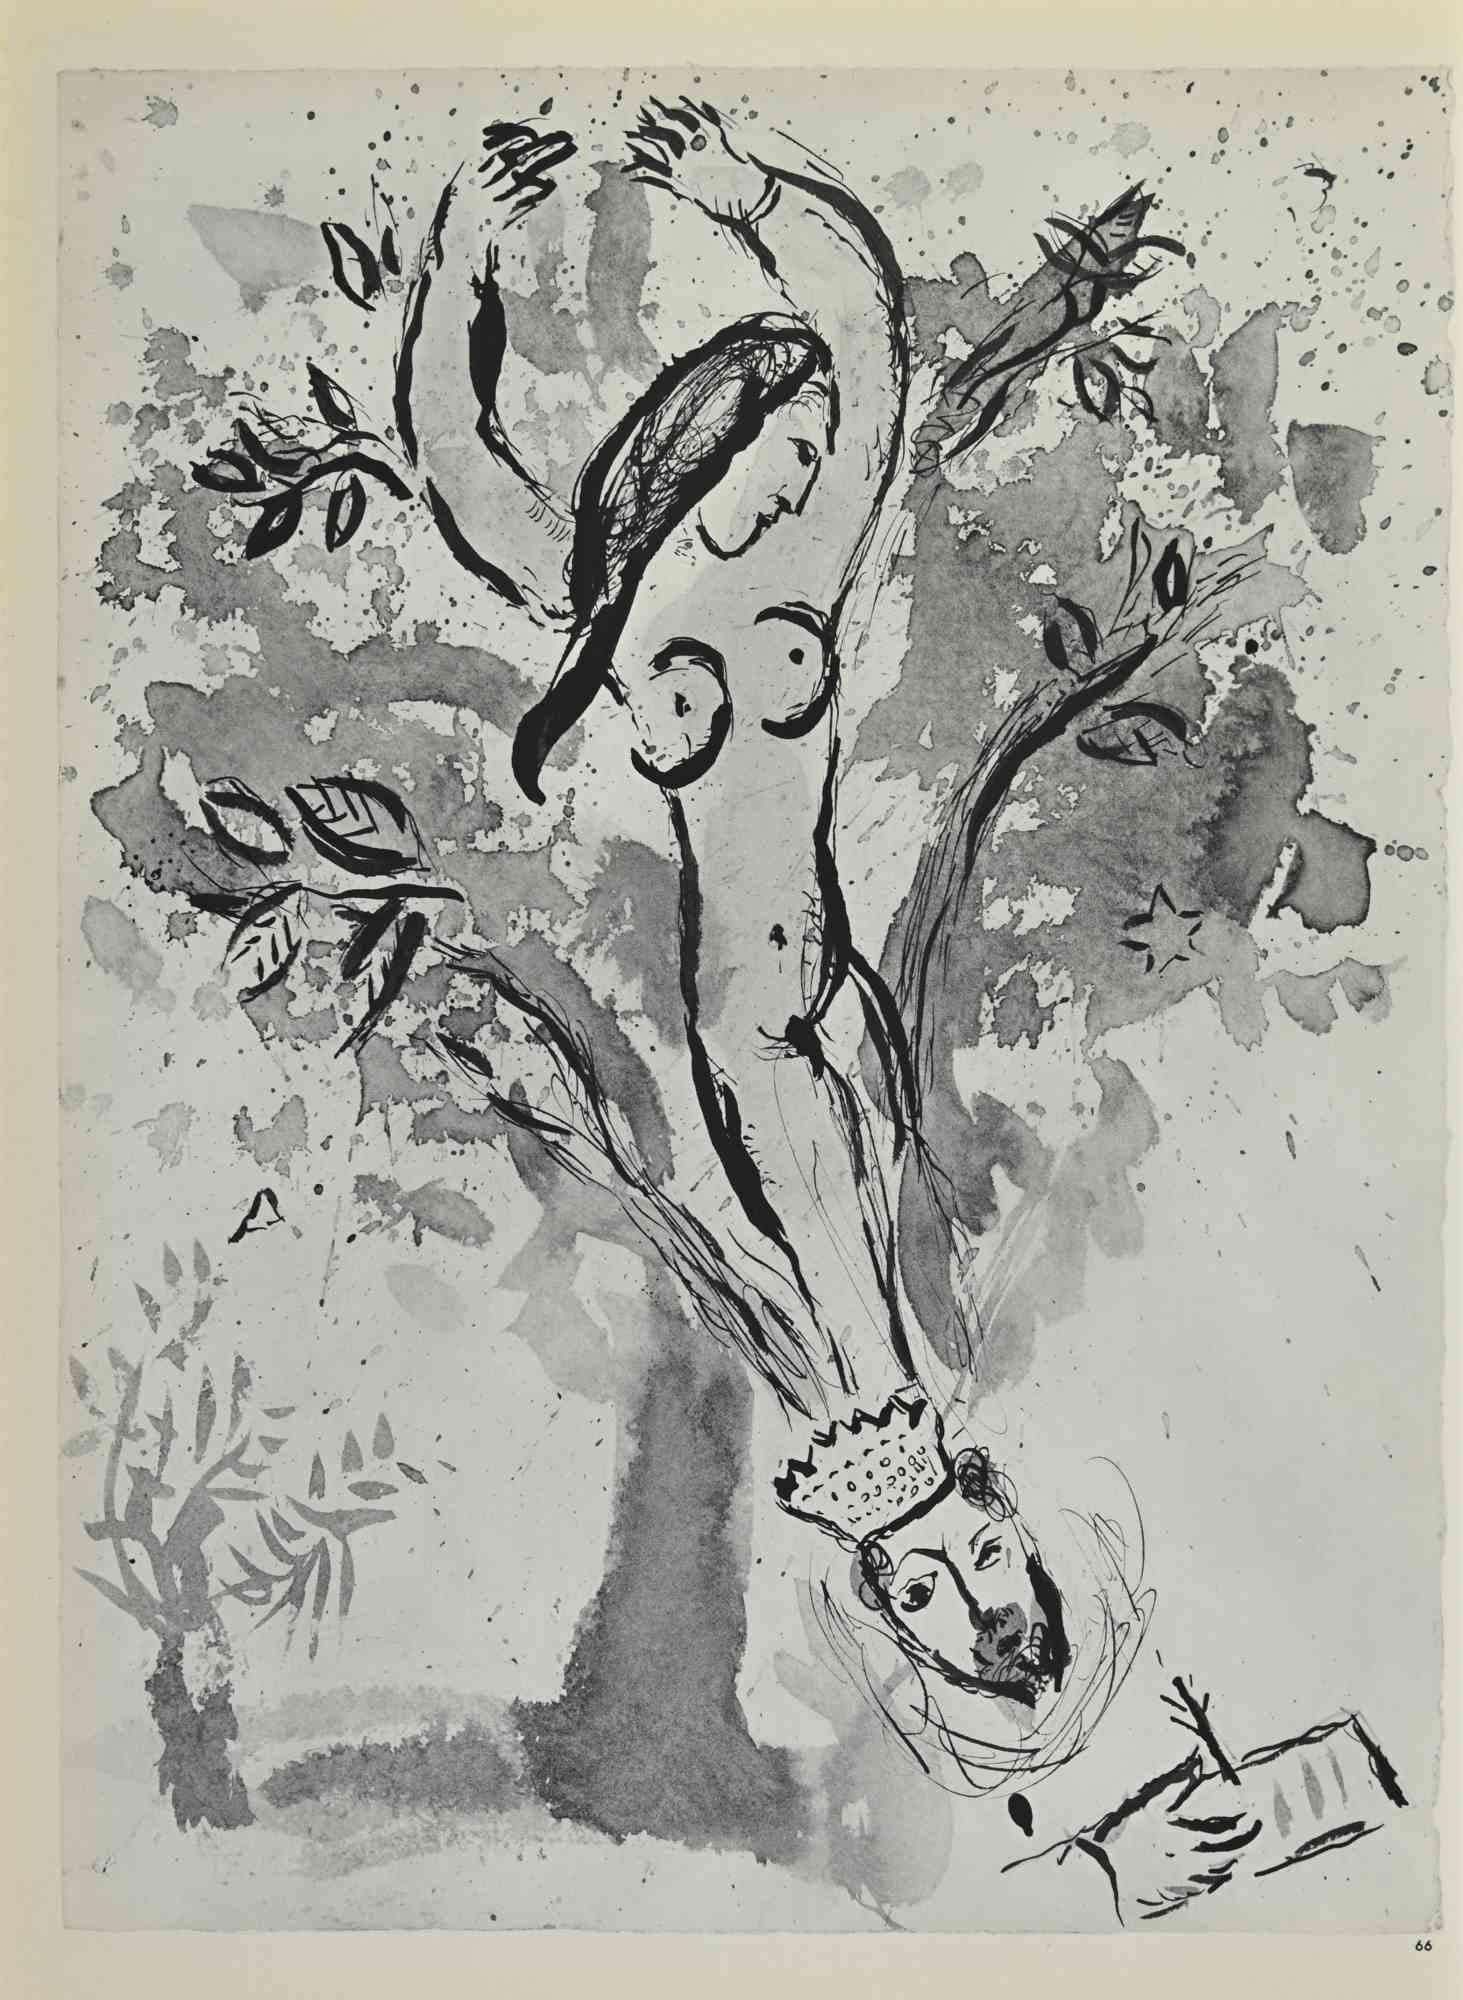 Conclusion de l'ecclésiaste is an artwork realized by March Chagall, 1960s.

Lithograph on brown-toned paper, no signature.

Lithograph on both sheets.

Edition of 6500 unsigned lithographs. Printed by Mourlot and published by Tériade, Paris.

Ref.